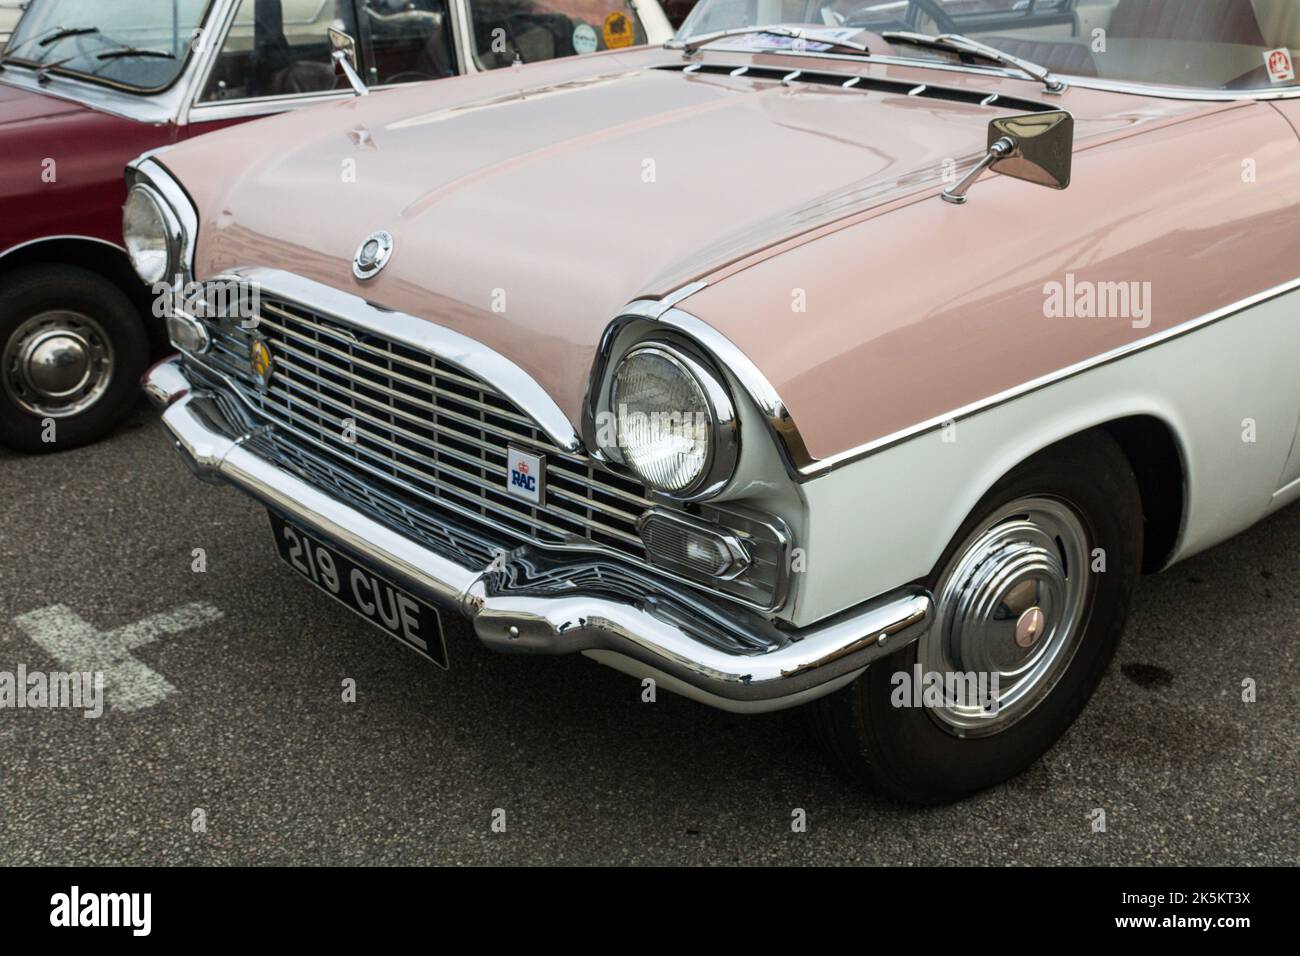 Vauxhall Cresta. Vintage By The Sea 2022. Stock Photo